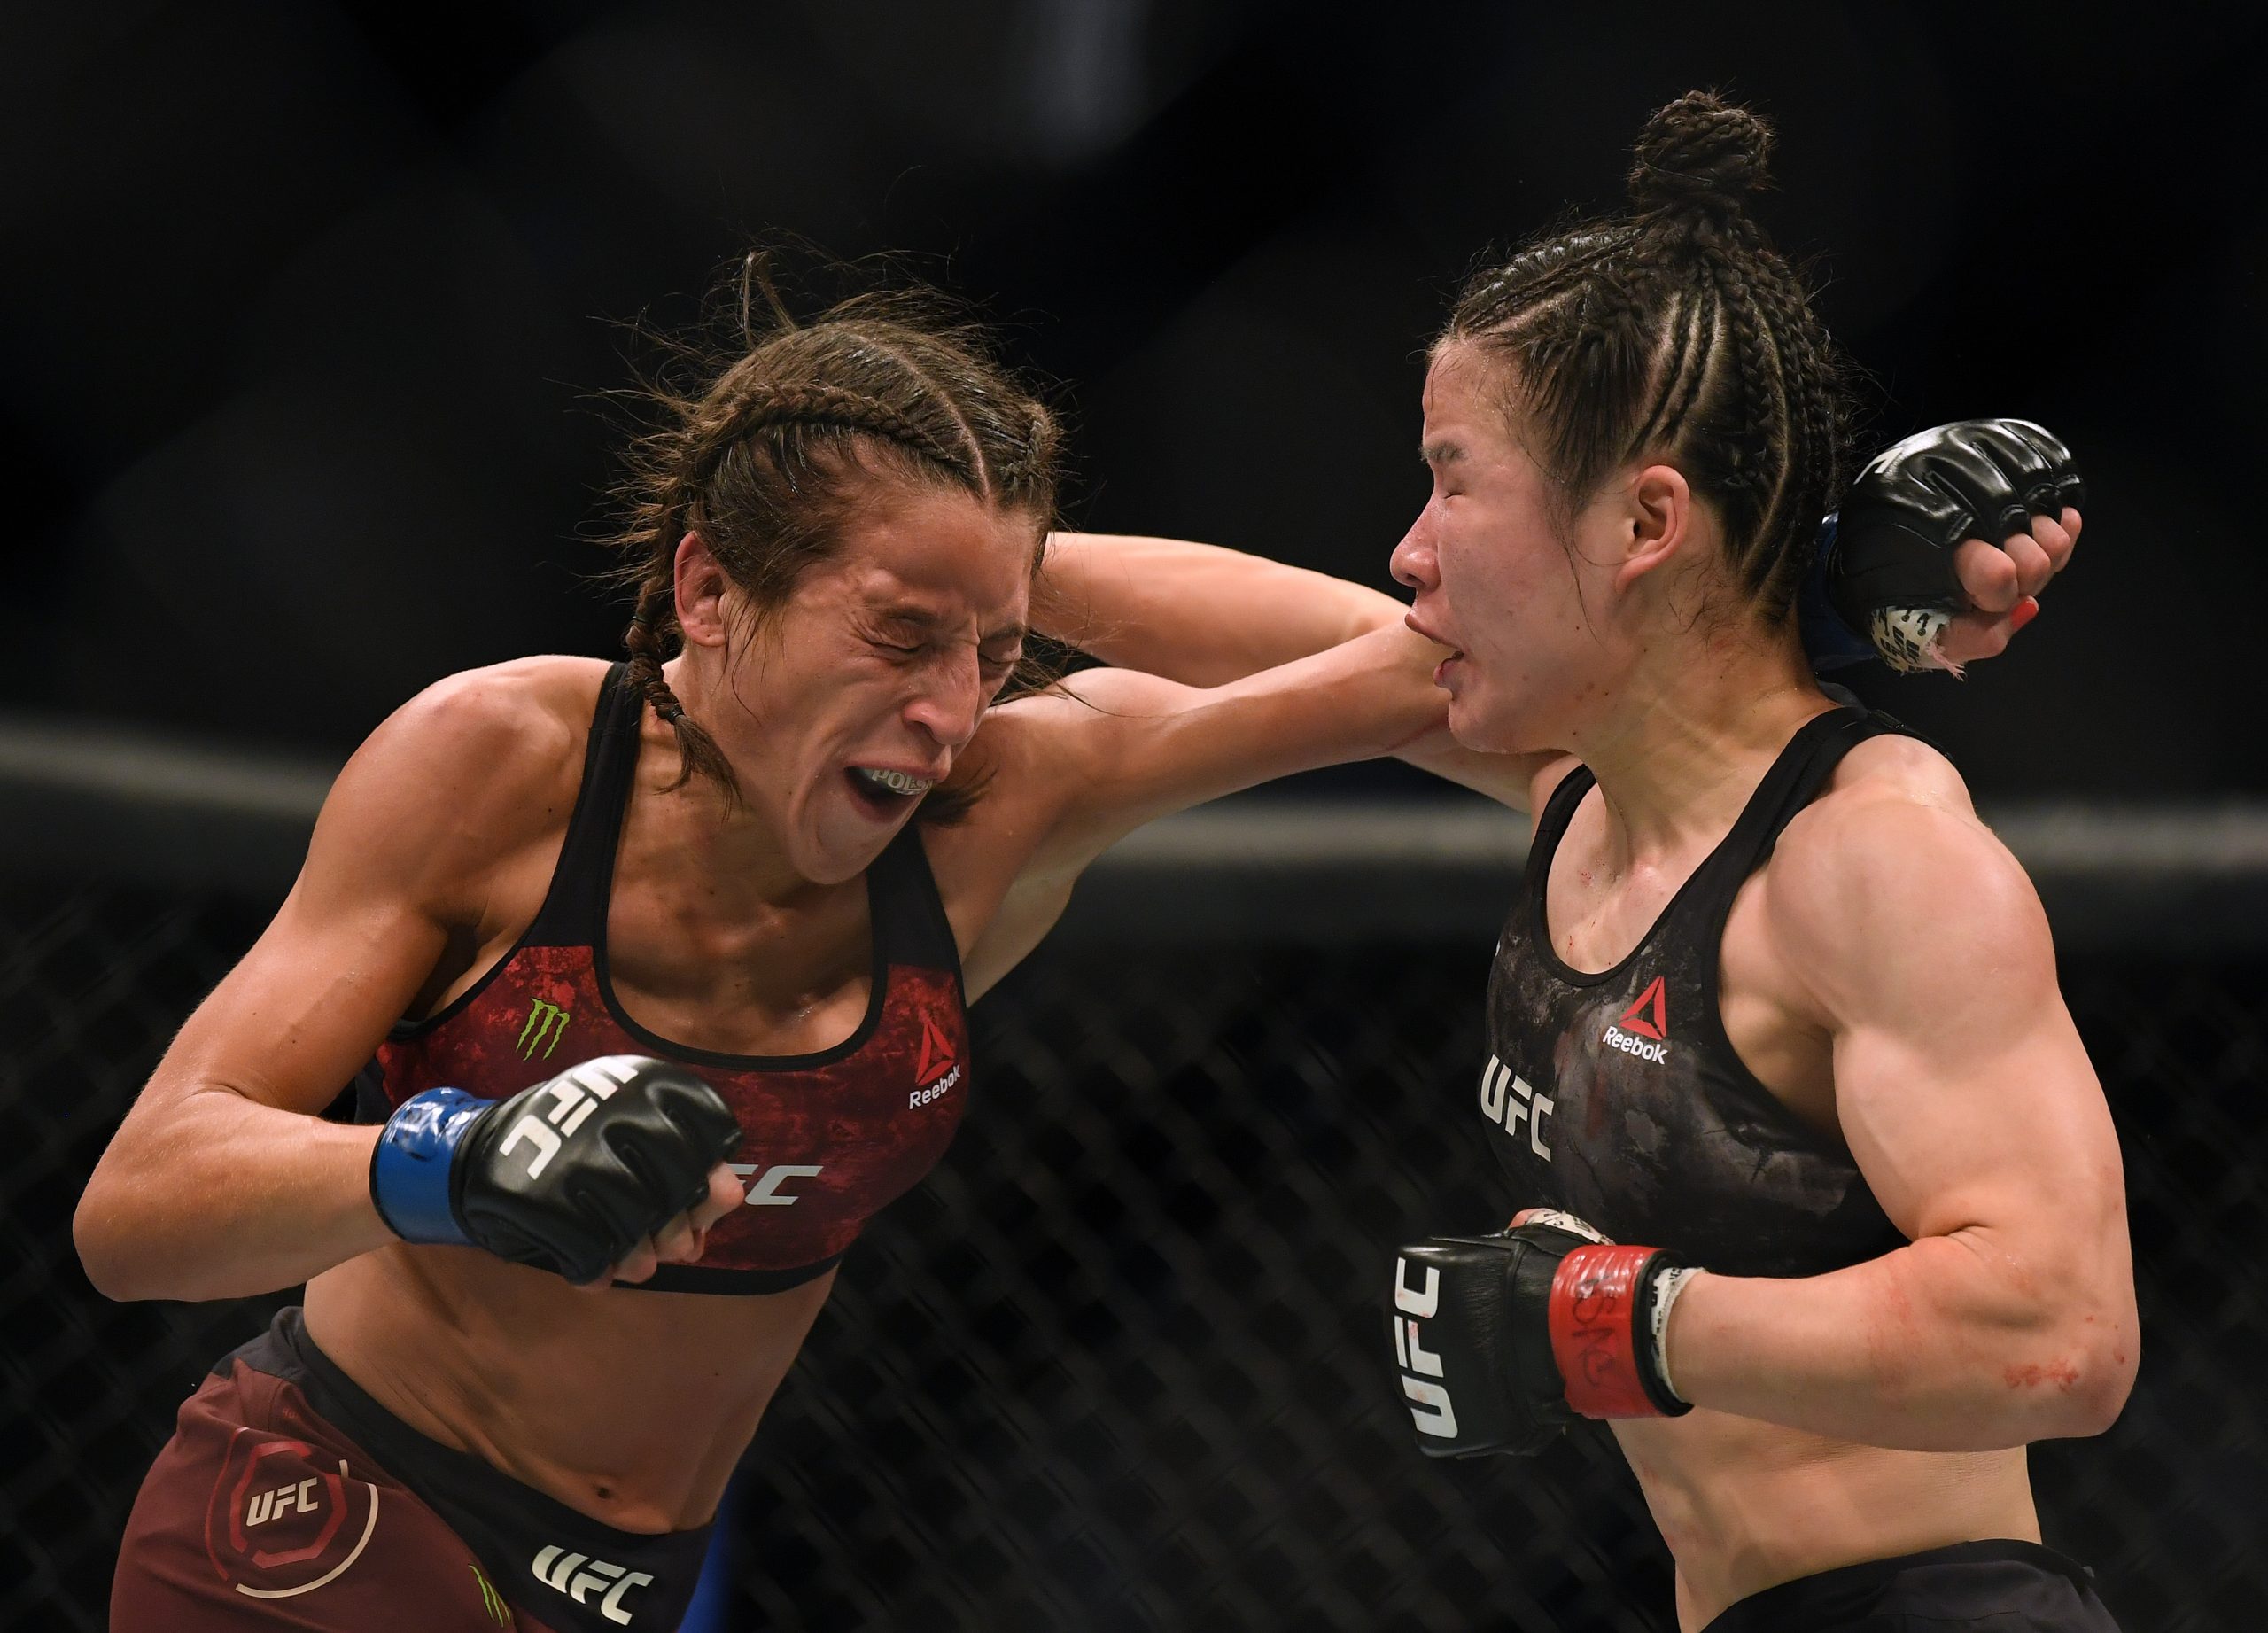 Zhang Weili retained her crown at UFC 248